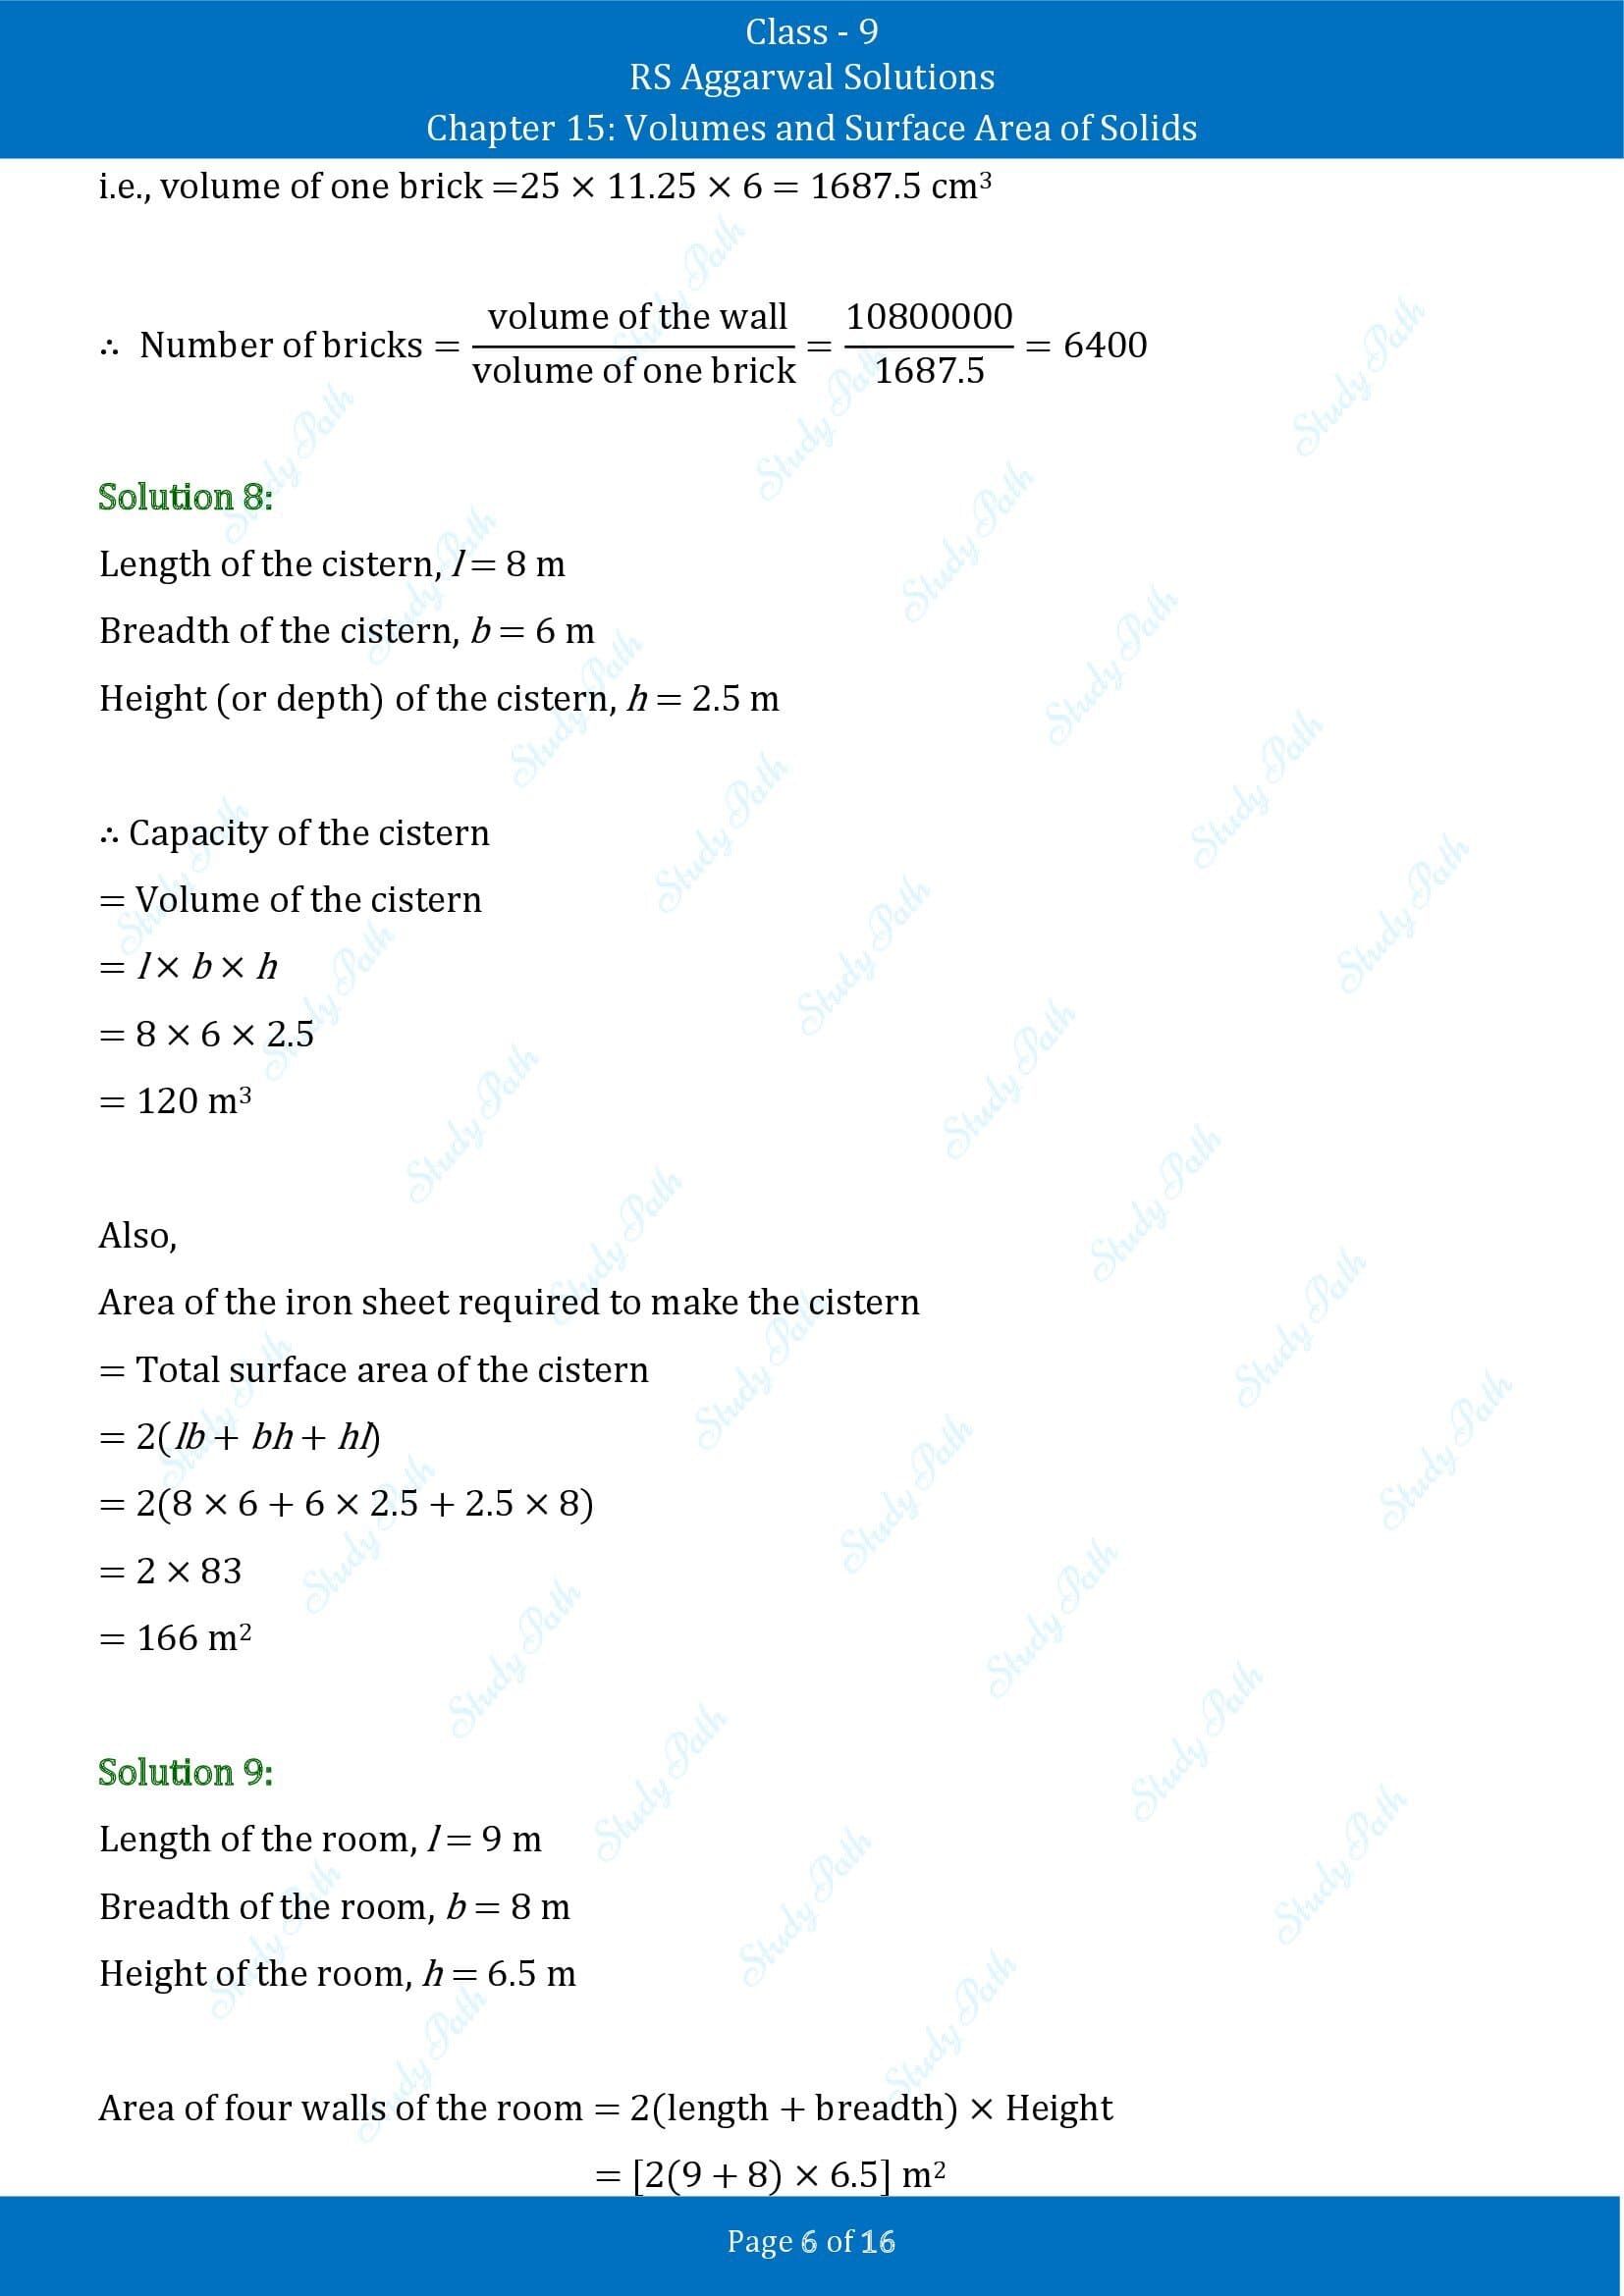 RS Aggarwal Solutions Class 9 Chapter 15 Volumes and Surface Area of Solids Exercise 15A 00006